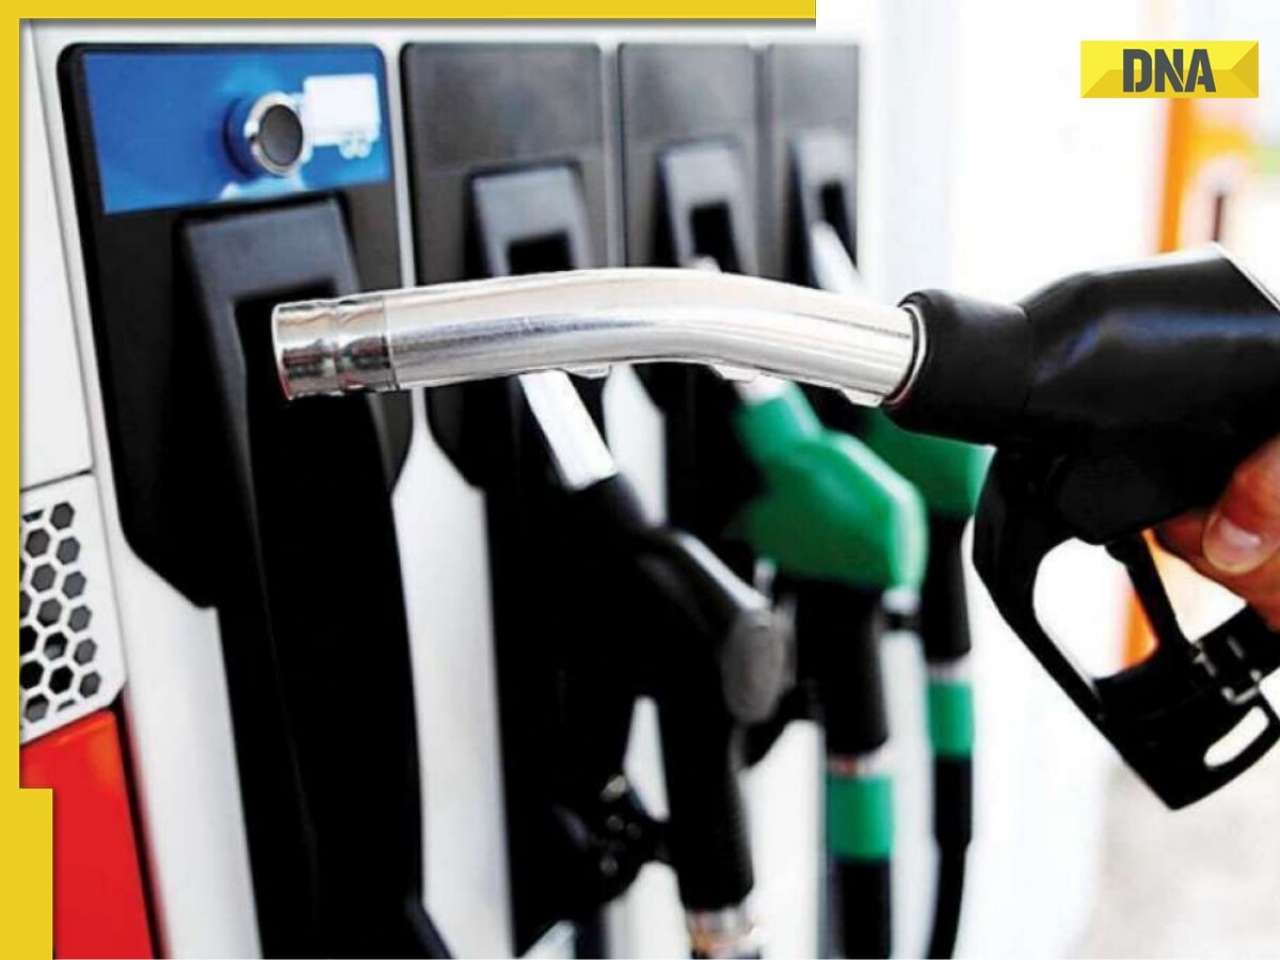 Petrol, diesel prices reduced by Rs 2 per litre from tomorrow